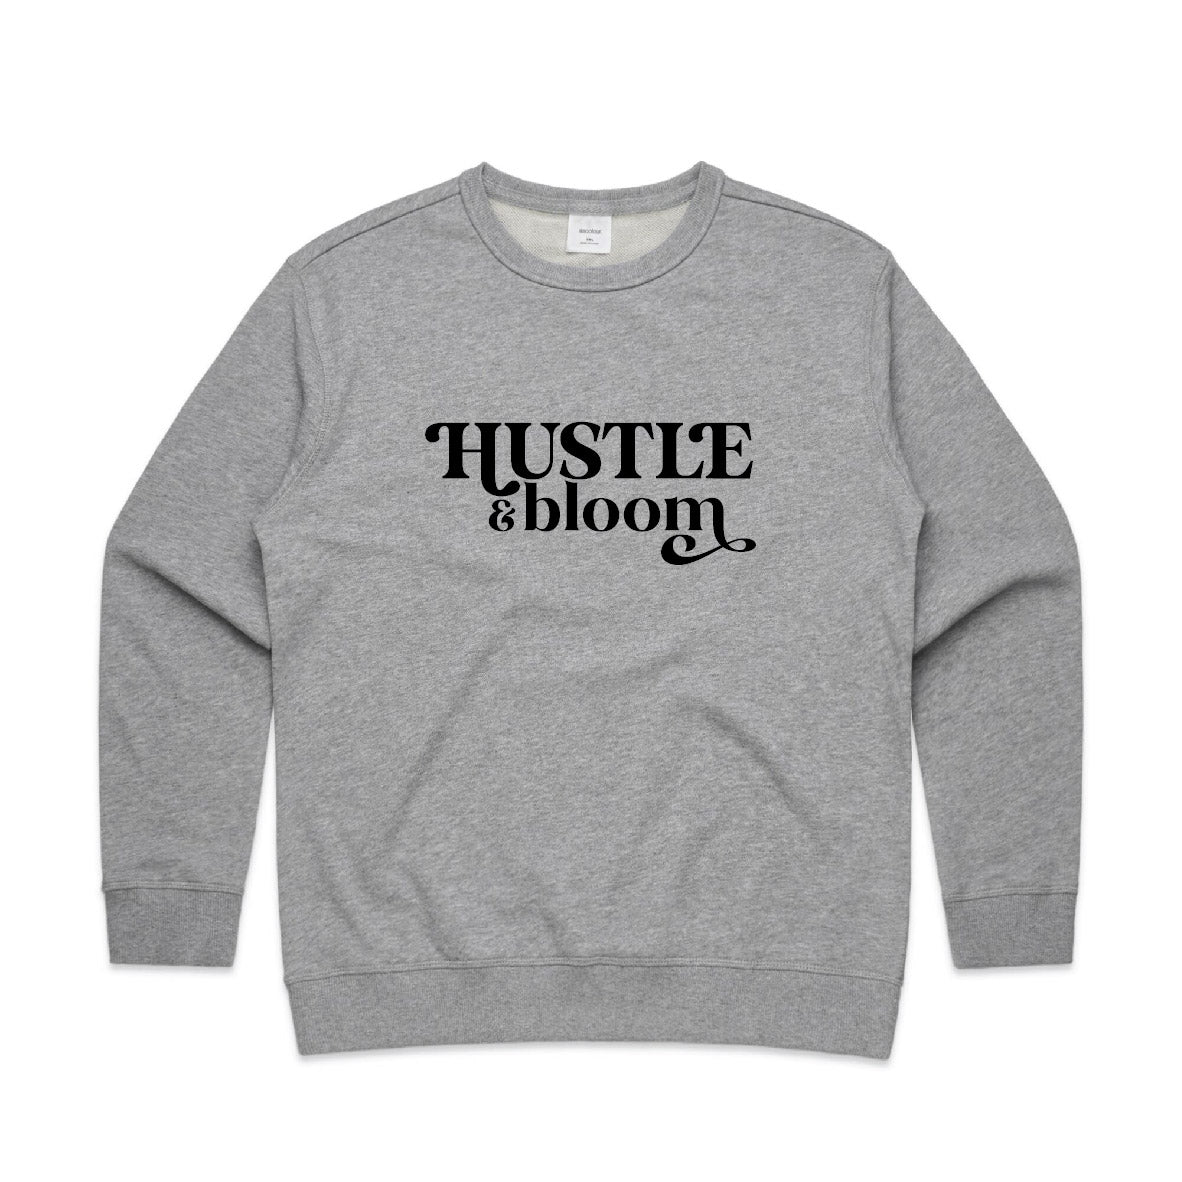 Grey crew neck jumper with black text stating "Hustle and Bloom"